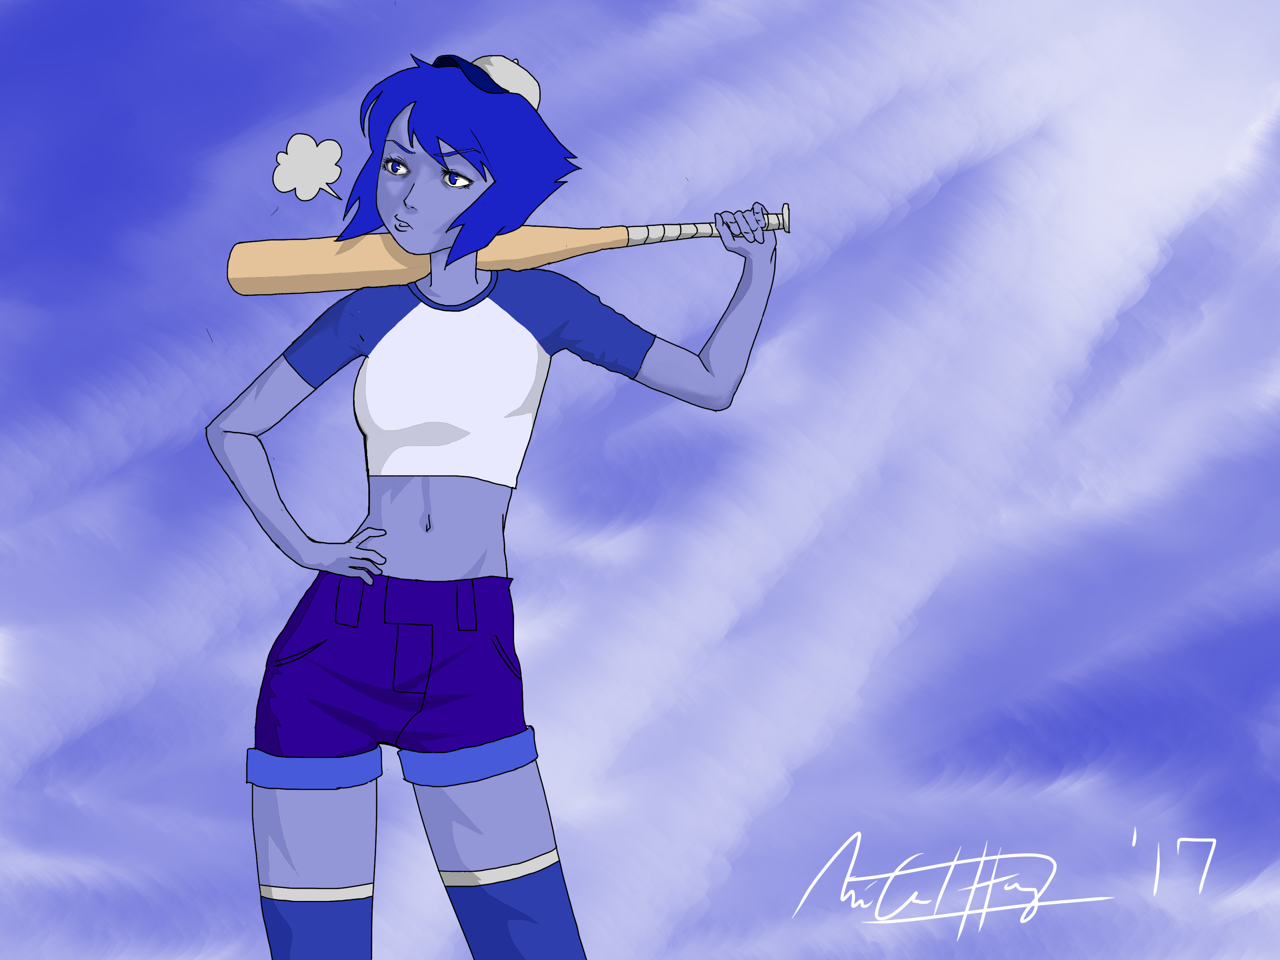 Lapis “Bob” Lazuli. I got lazy with the drawing and the coloring/shading so I might come back and post a better version. Probably not.